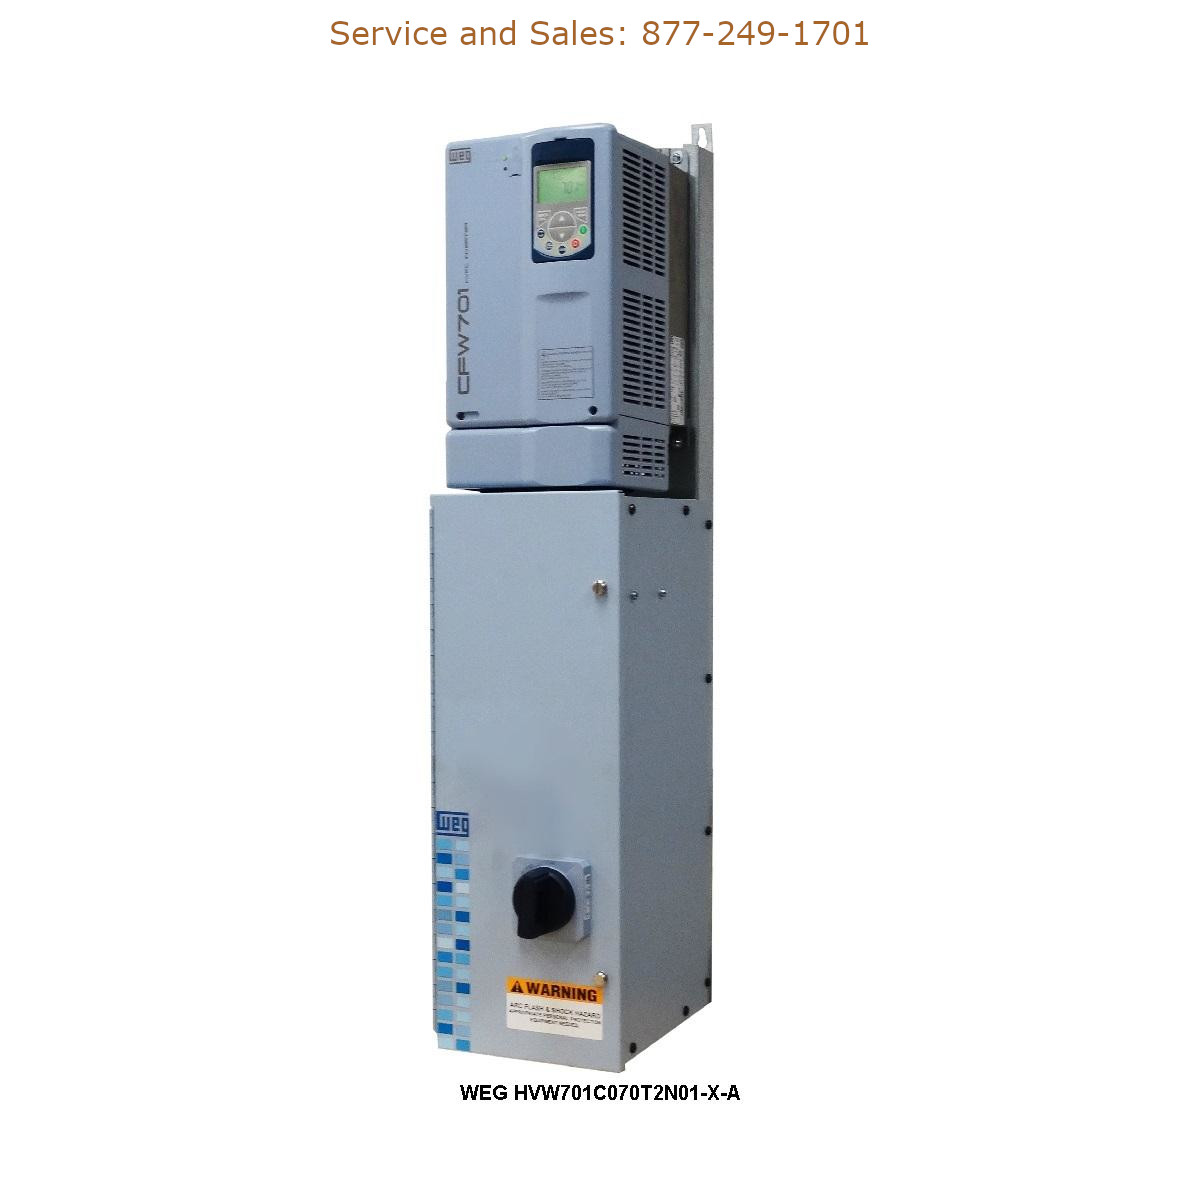 WEG HVW701C070T2N01-X-A WEG Model Number HVW701C070T2N01-X-A WEG Drives, Variable Speed Drives Repair Service, Troubleshooting, Replacement Parts https://gesrepair.com/wp-content/uploads/2022/WEG/WEG_HVW701C070T2N01-X-A_Drives_Variable_Speed_Drives.jpg